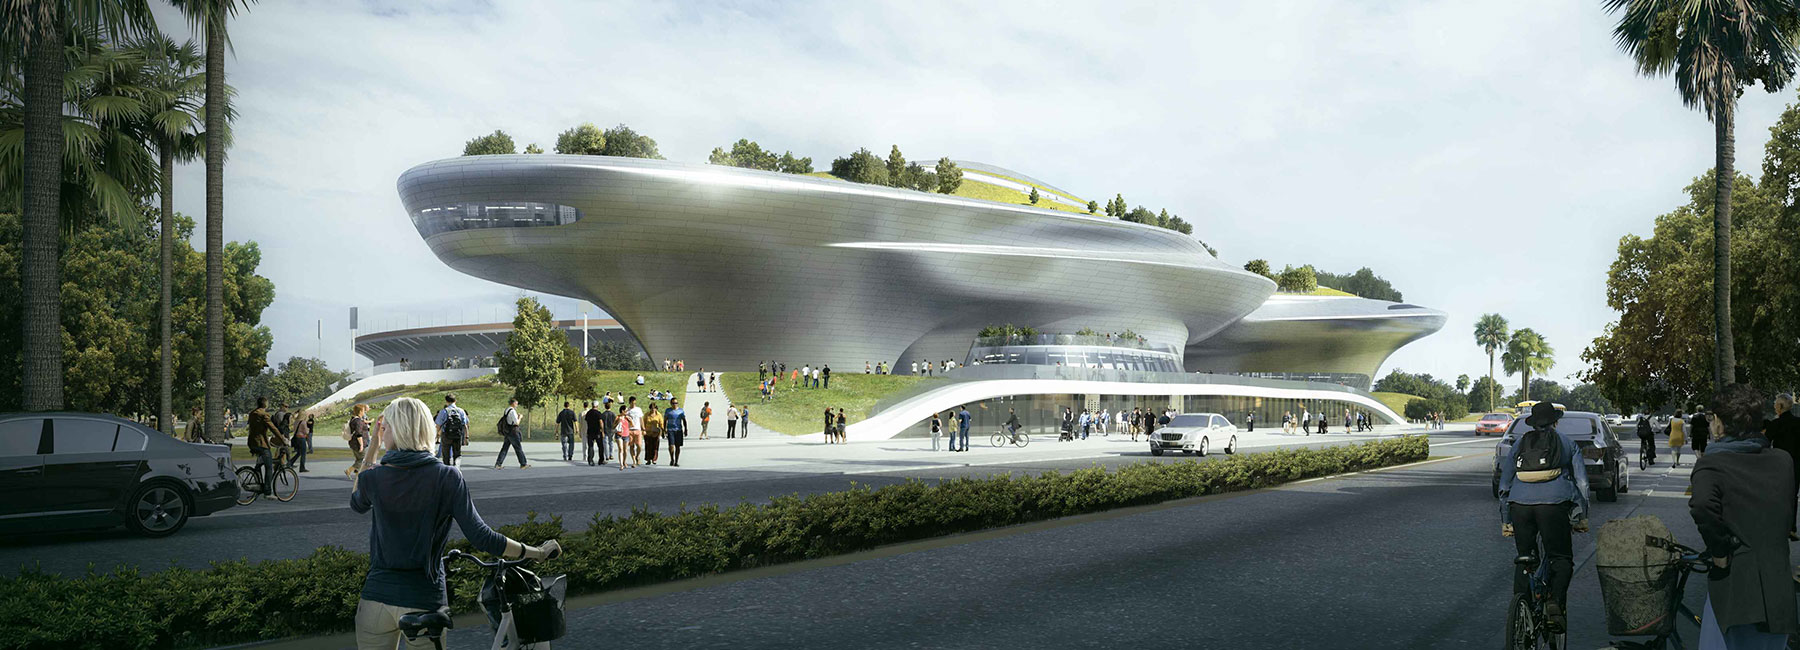 MAD architects updates plans for LA's george lucas museum of narrative art